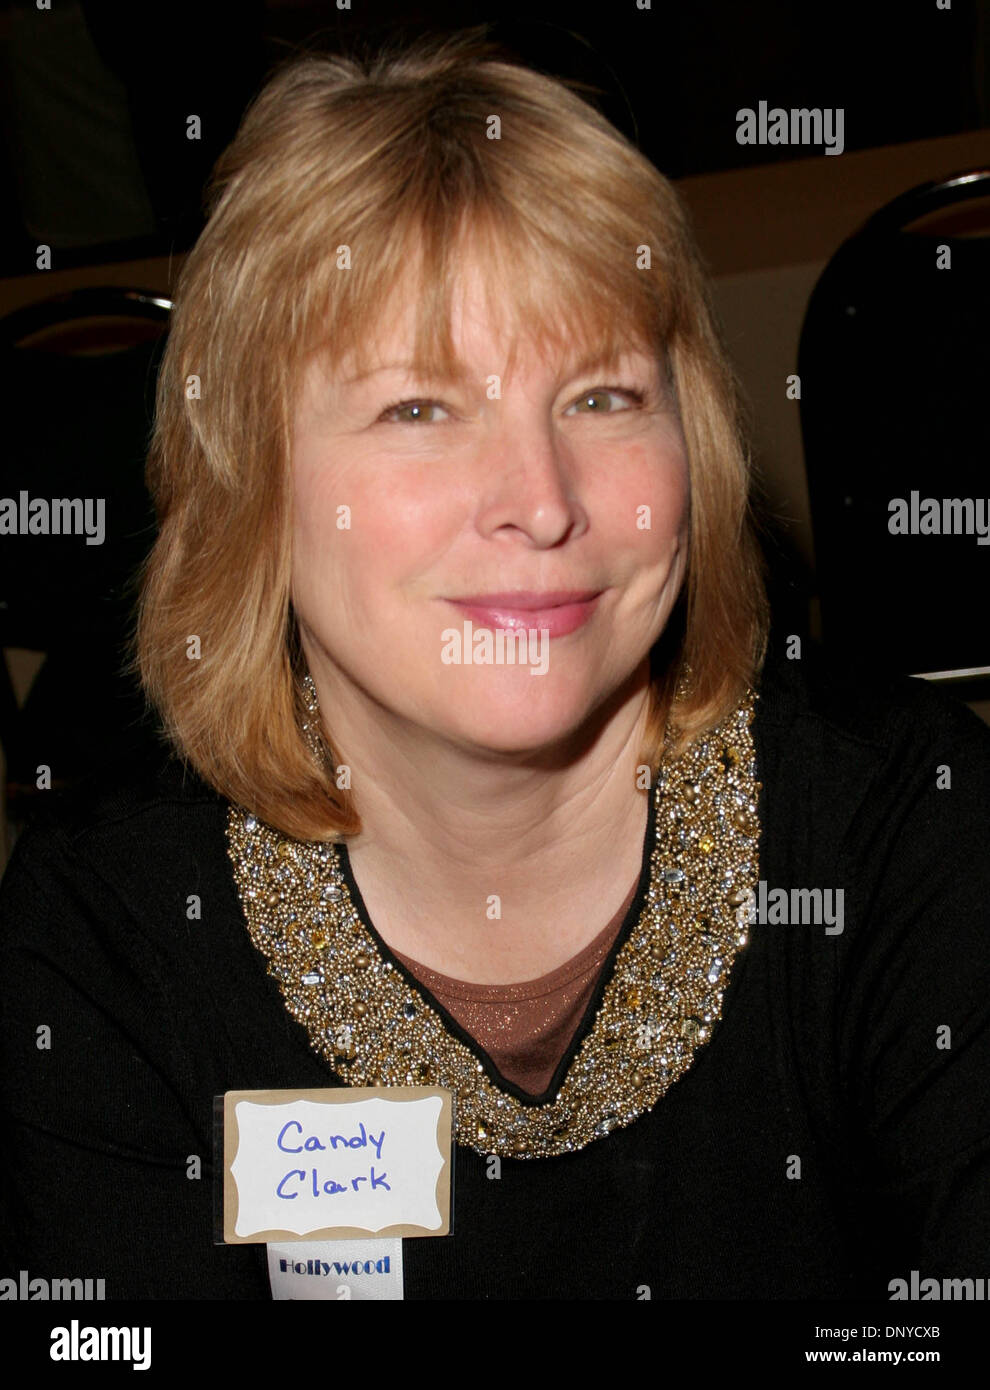 Jan 27, 2006; Burbank, CA, USA; Actress CANDY CLARK attends the Hollywood Collectors Show at the Burbank Airport Hilton & Convention Center. Mandatory Credit: Photo by Scott Weiner/ZUMA Press. (©) Copyright 2006 by Scott Weiner Stock Photo